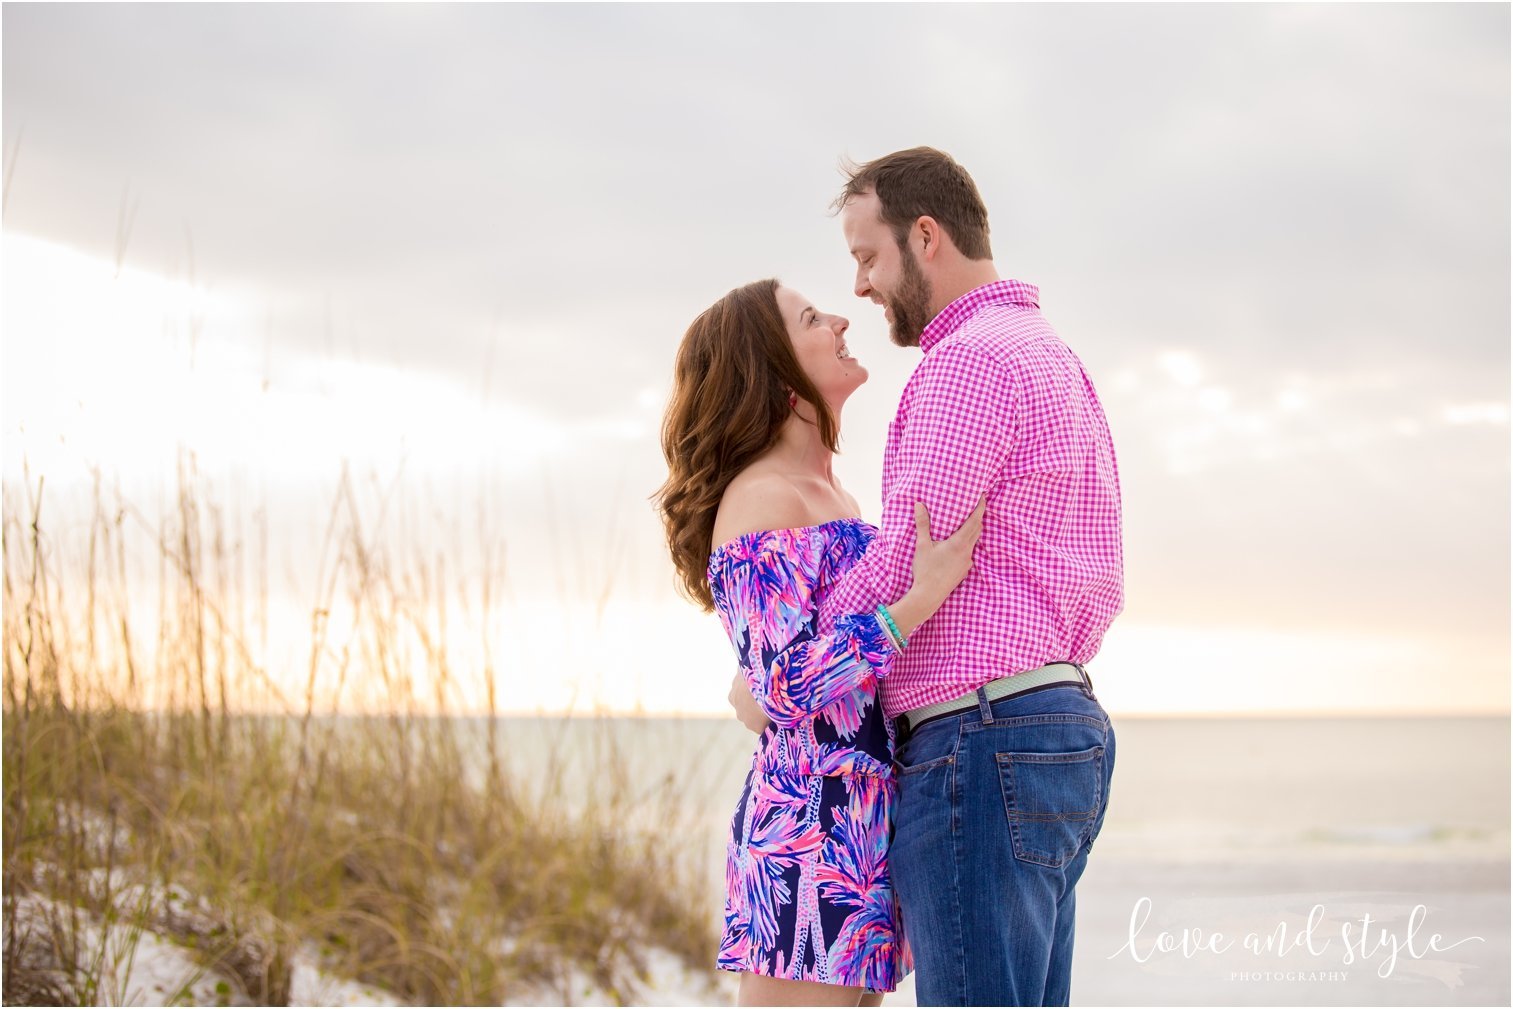 Engagement Photography on Coquina Beach at Sunset with couple embracing on Anna Maria Island